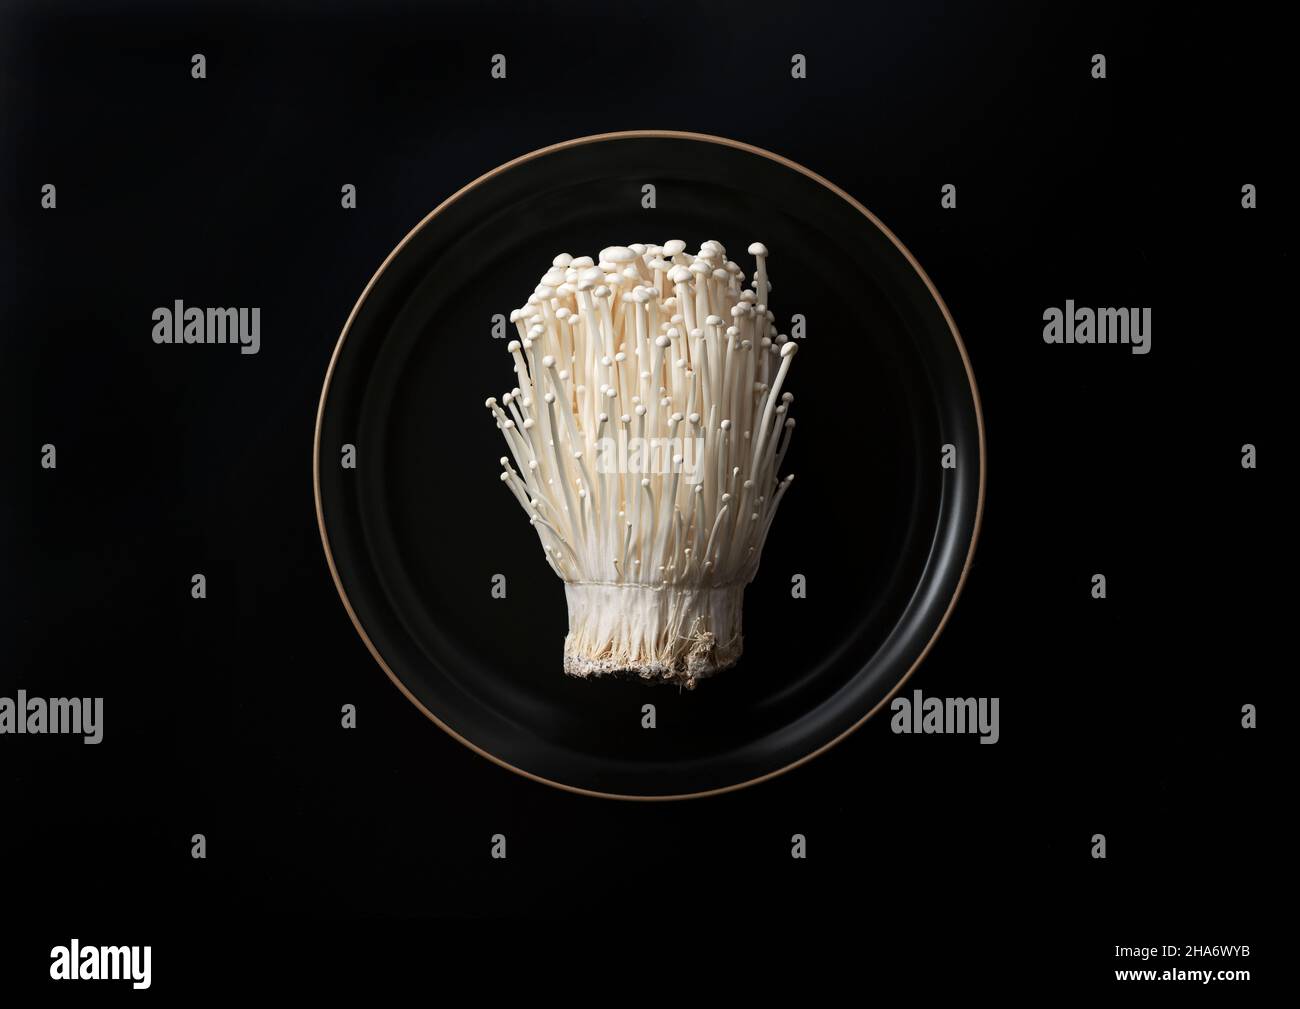 Enoki mushrooms in a plate set against a black background. View from above. Stock Photo